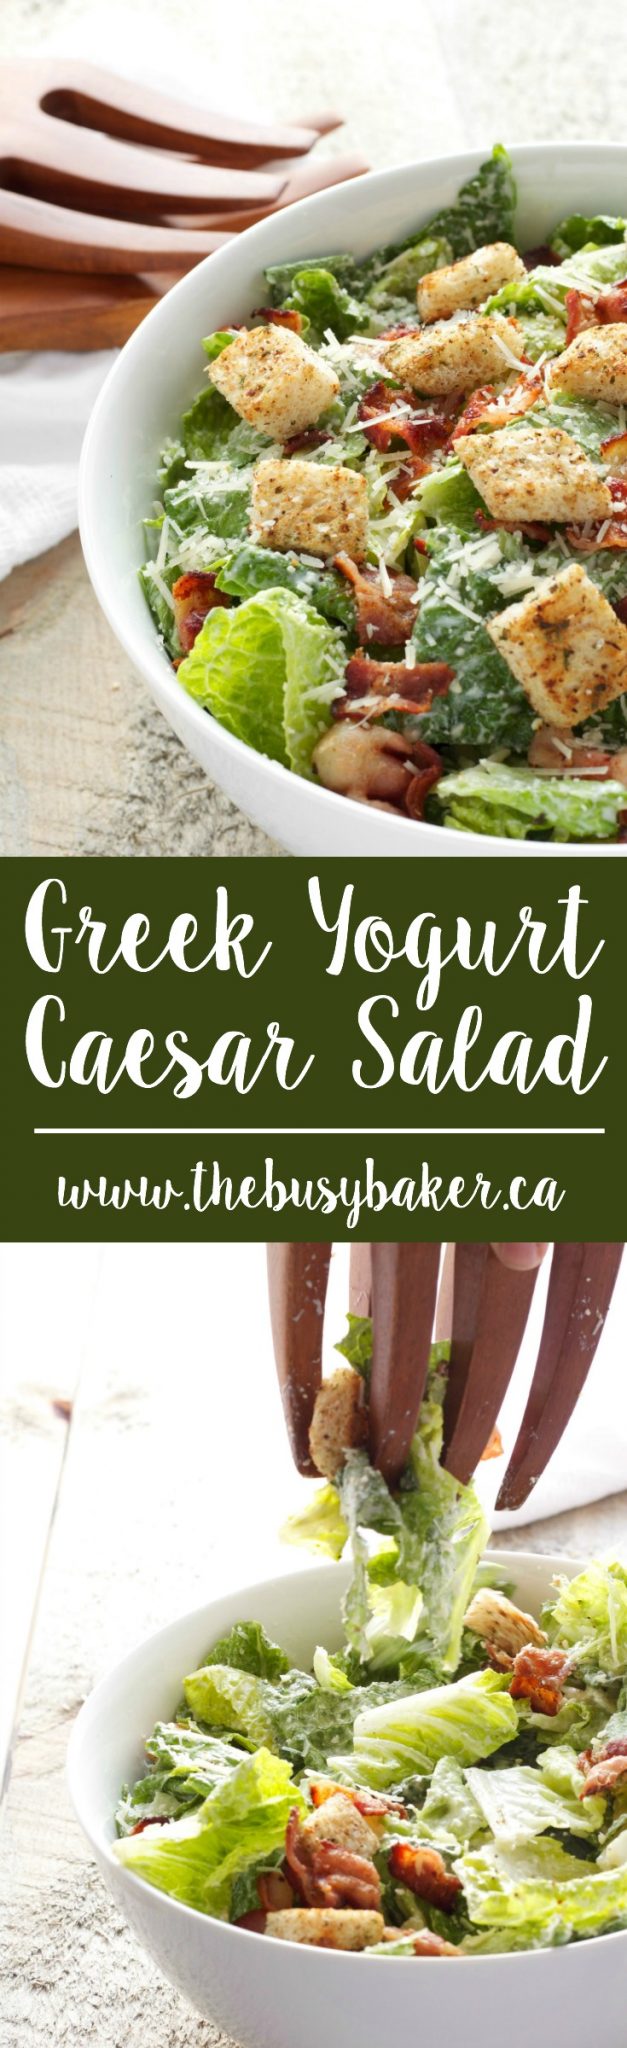 This Greek Yogurt Caesar Salad is a healthy and low fat alternative to traditional Caesar salad! It's ultra creamy and delicious and it's so easy to make! Recipe from thebusybaker.ca! via @busybakerblog